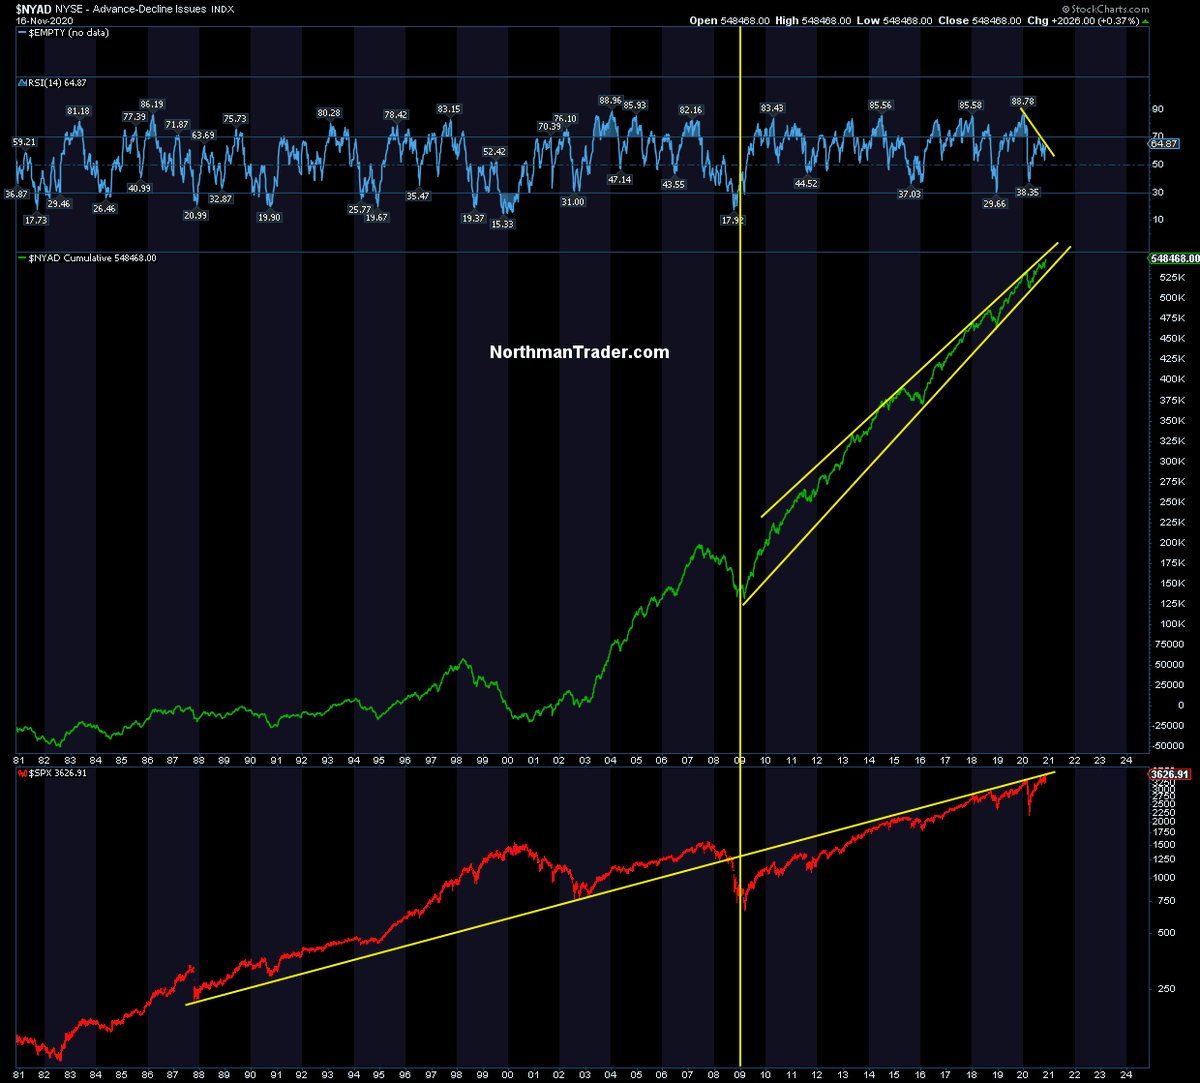 Final note: All this intervention has unleashed the mother of all TINA effects as seen in cumulative  $NYAD.Notable though the  $SPX trend broken in 2008 and going back to 1987 remains resistance.And new highs in  $NYAD are coming on a pronounced negative divergence.